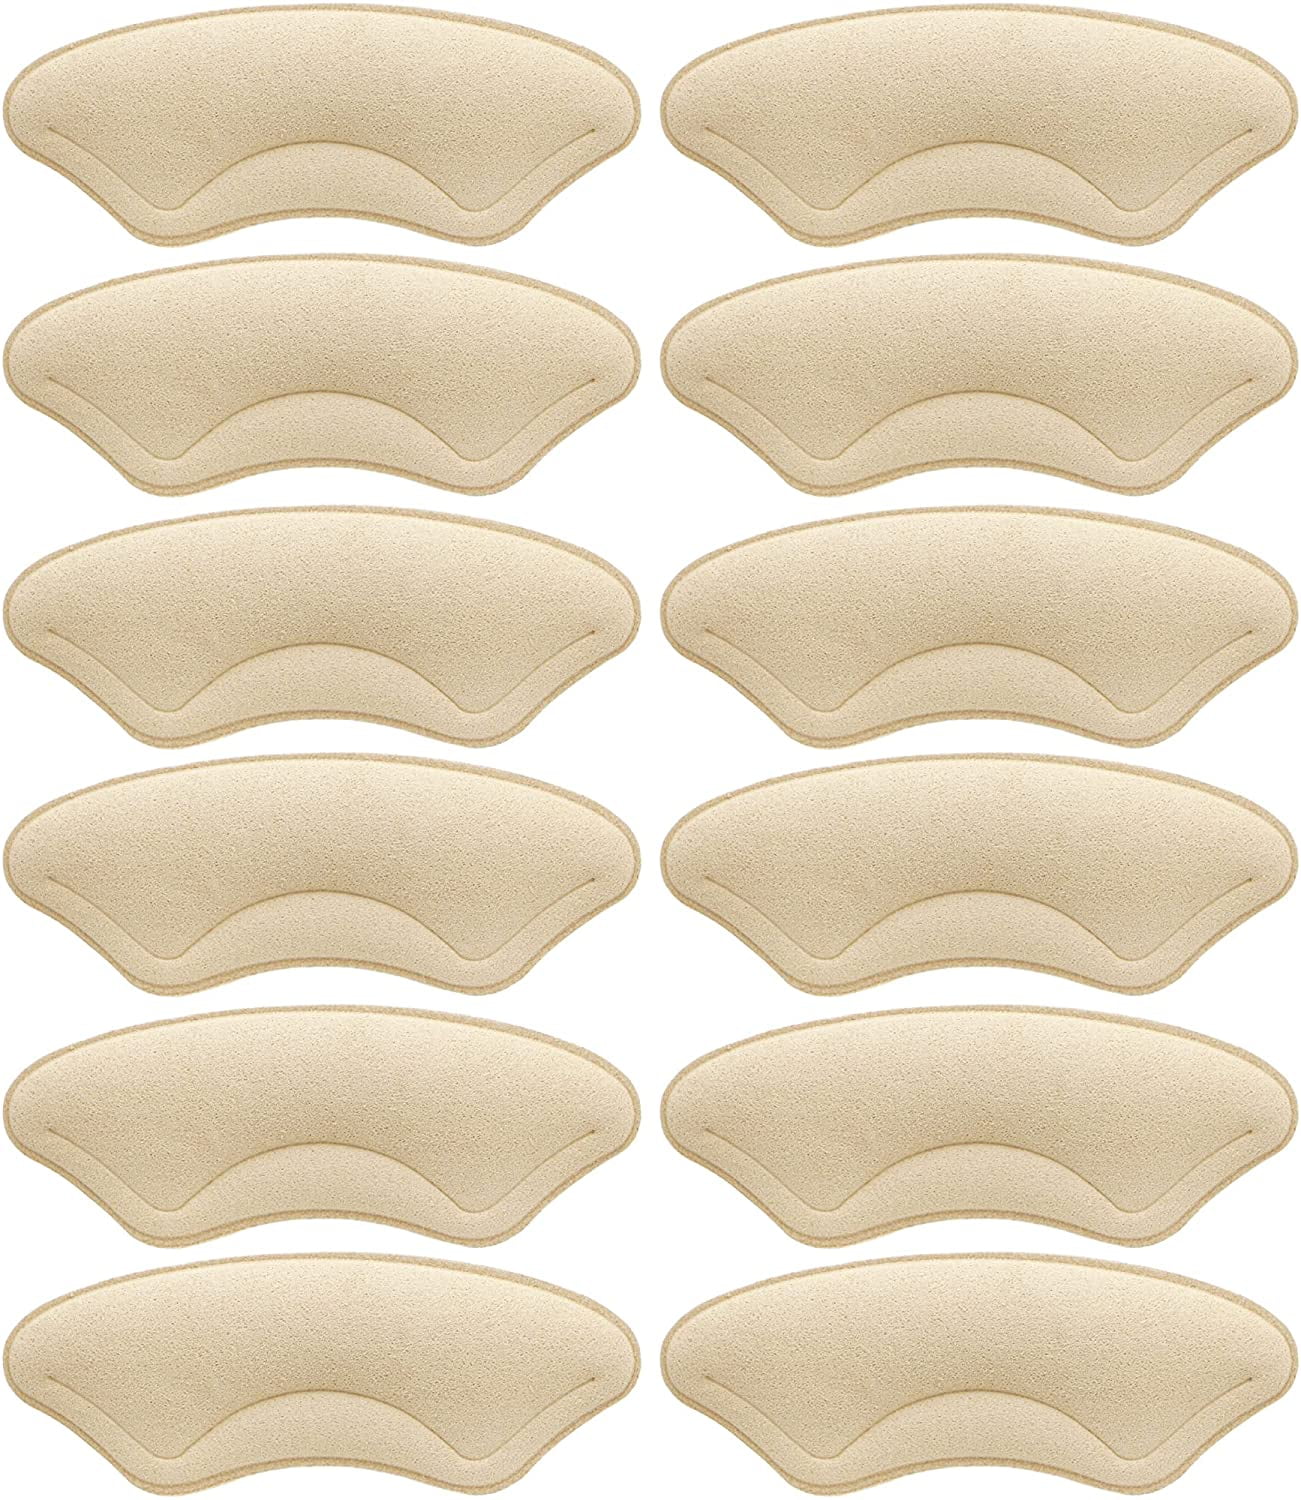 6 Pairs Heel Cushion Pads Heel Pain Relief Bunion Callus Blisters Reusable Soft Shoe Pads & Self-Adhesive Foot Care Protector Grips Liners Loose Shoes